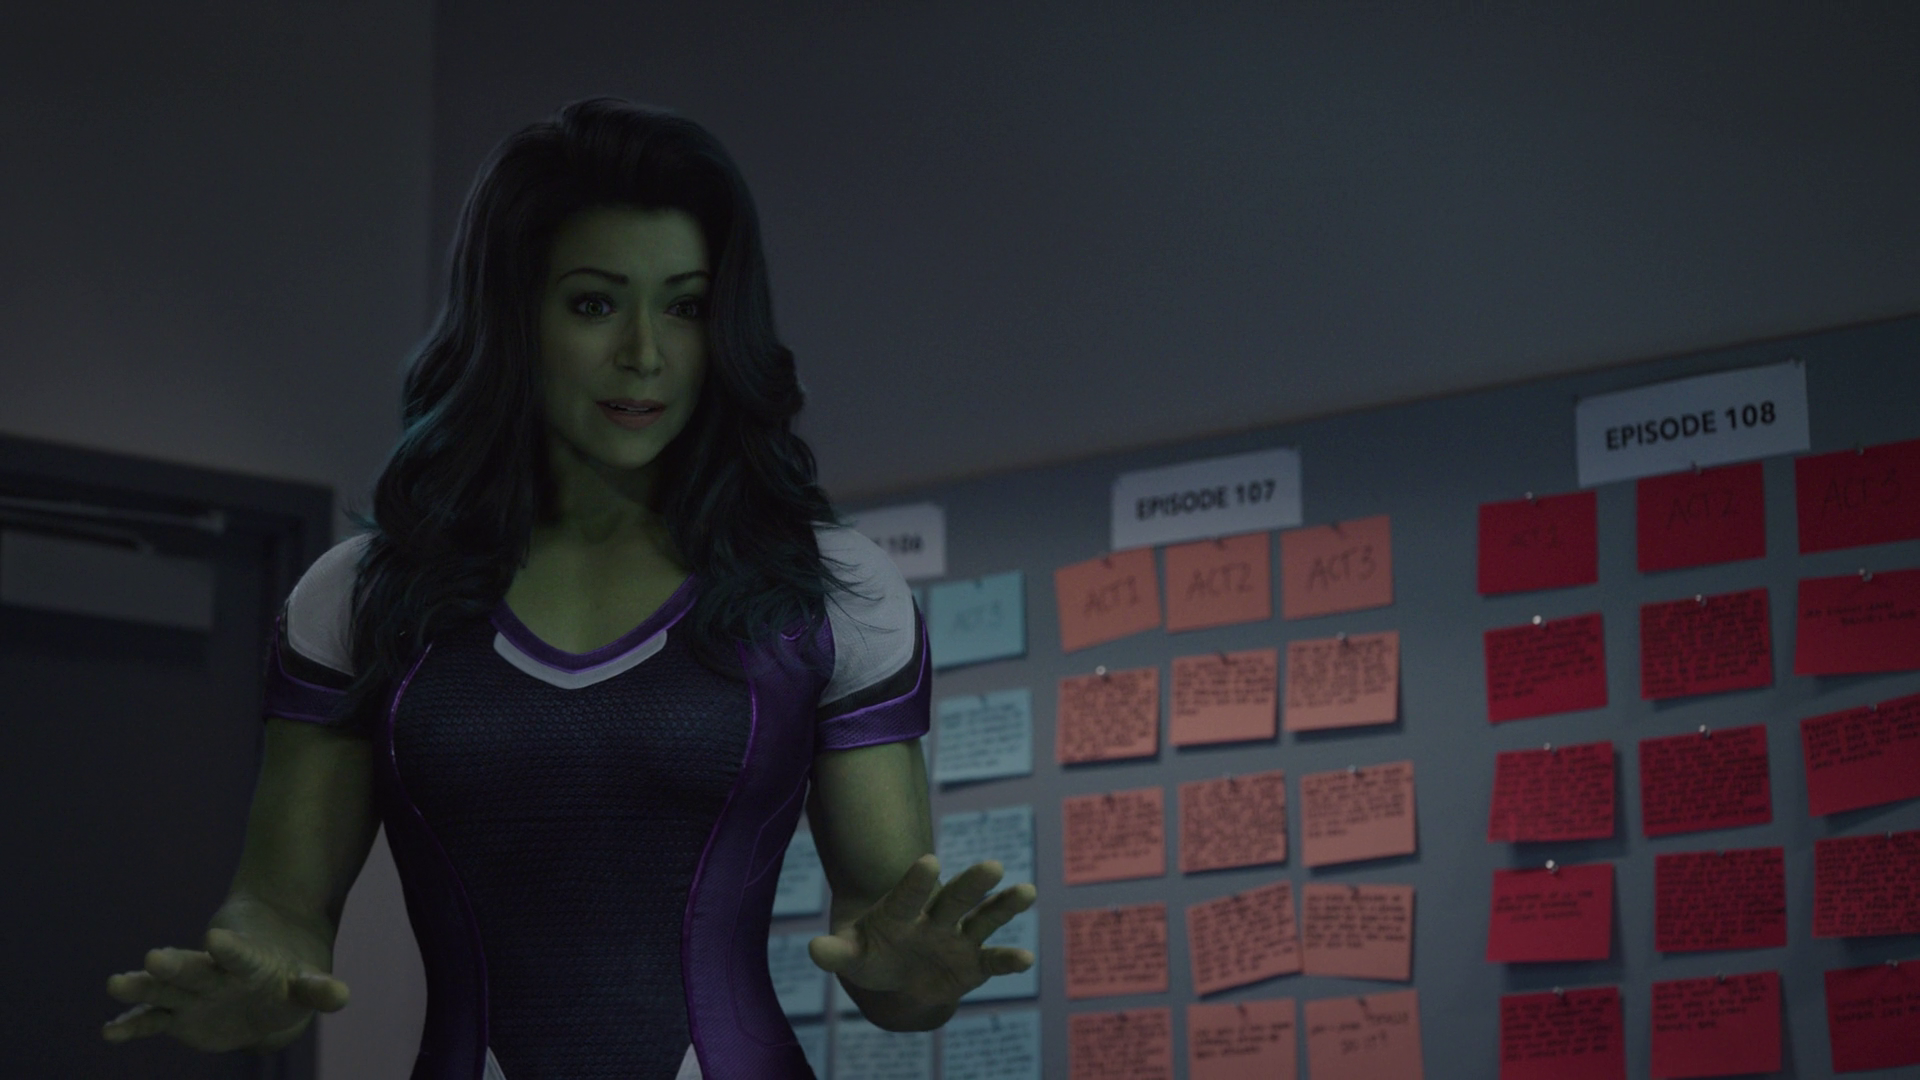 Jennifer Walters (Tatiana Maslany) has some thoughts on the show's direction in She-Hulk: Attorney at Law Season 1 Episode 9 "Whose Show Is This?" (2022), Marvel Entertainment